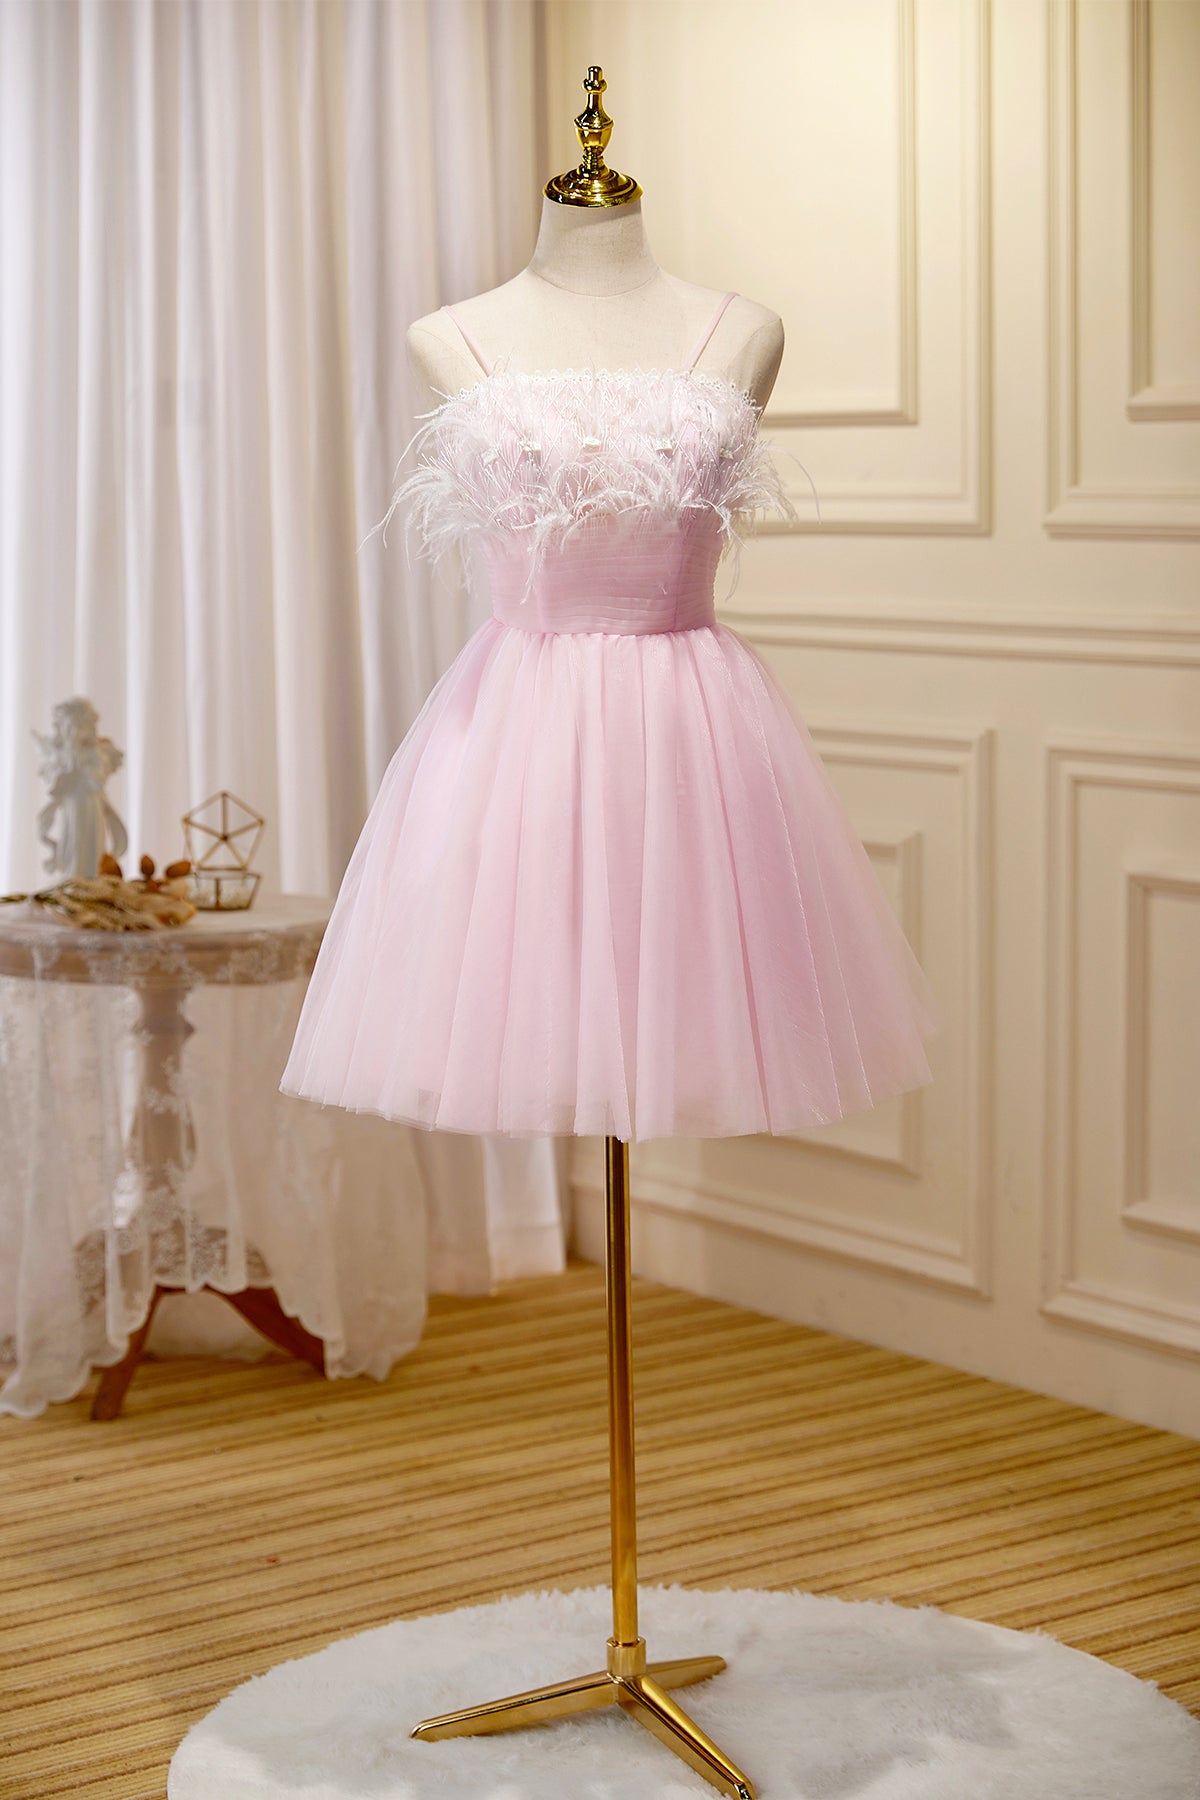 Pink Spaghetti Strap Tulle Short Prom Dress with Feather, Pink Party Dress